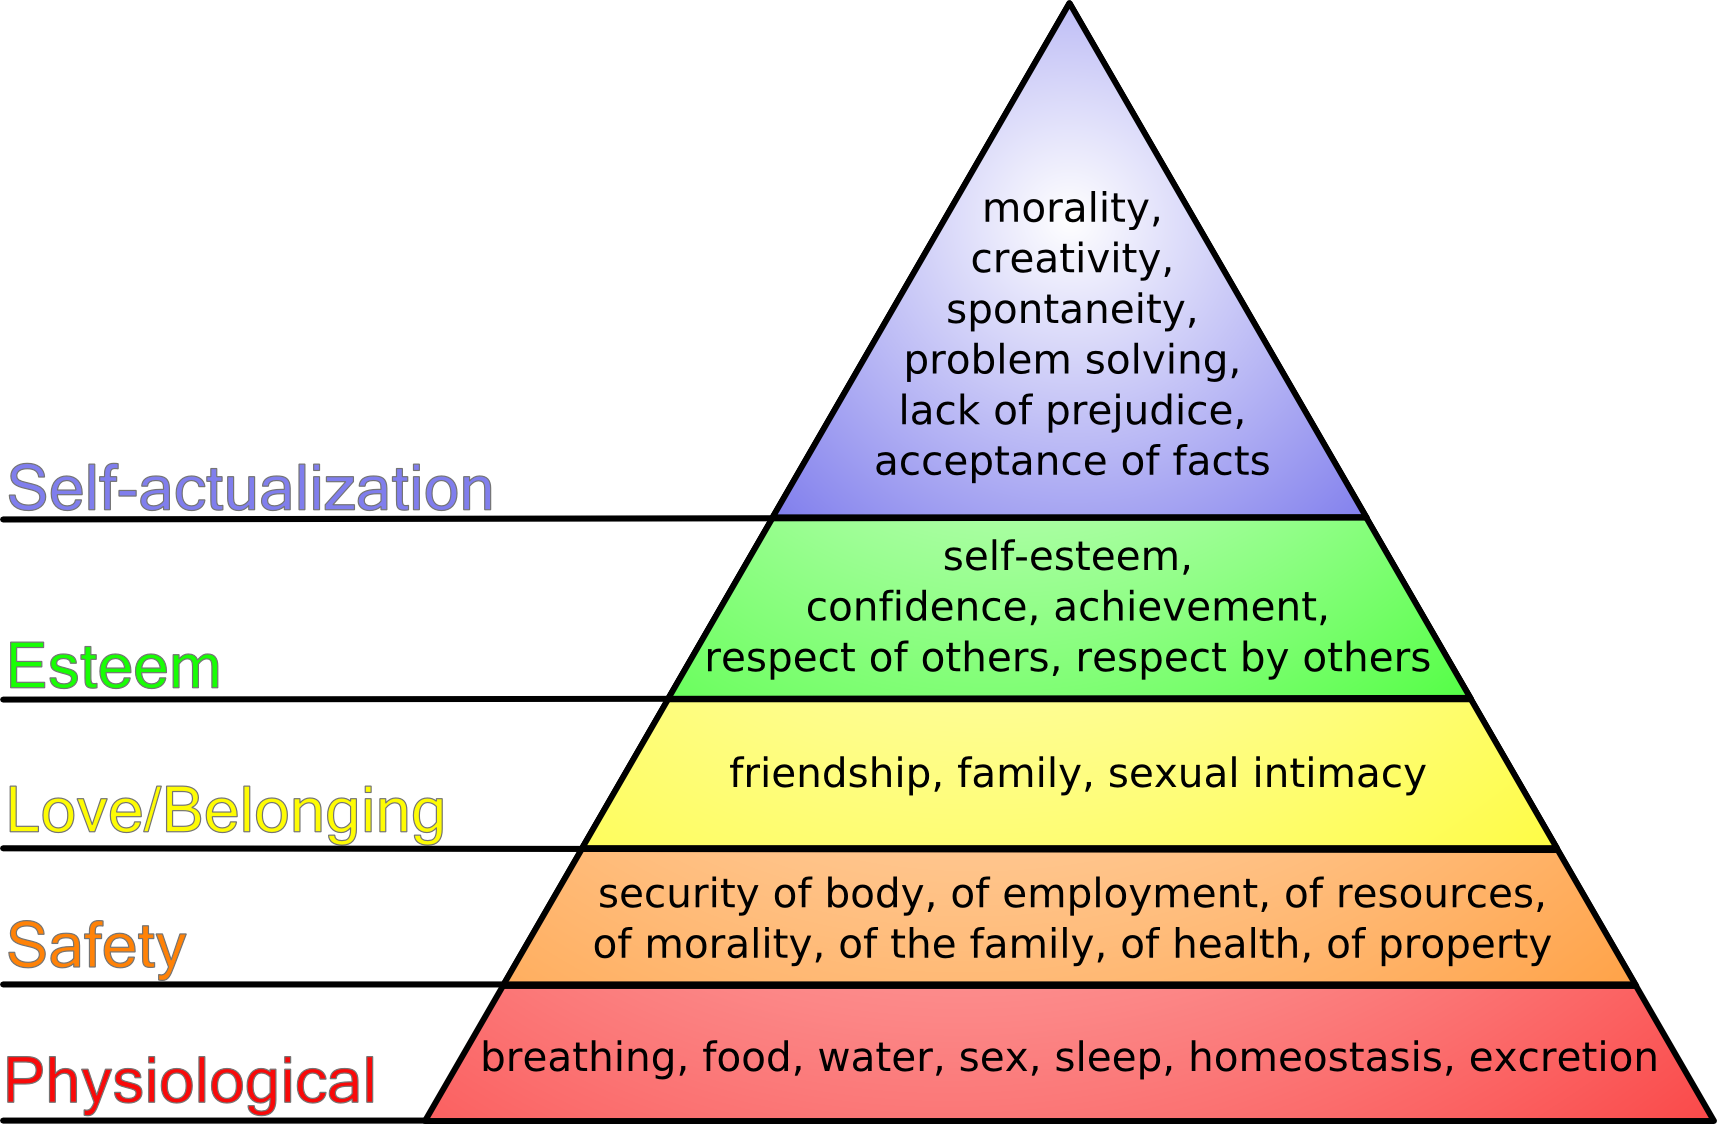 Maslow's_hierarchy_of_needs.png